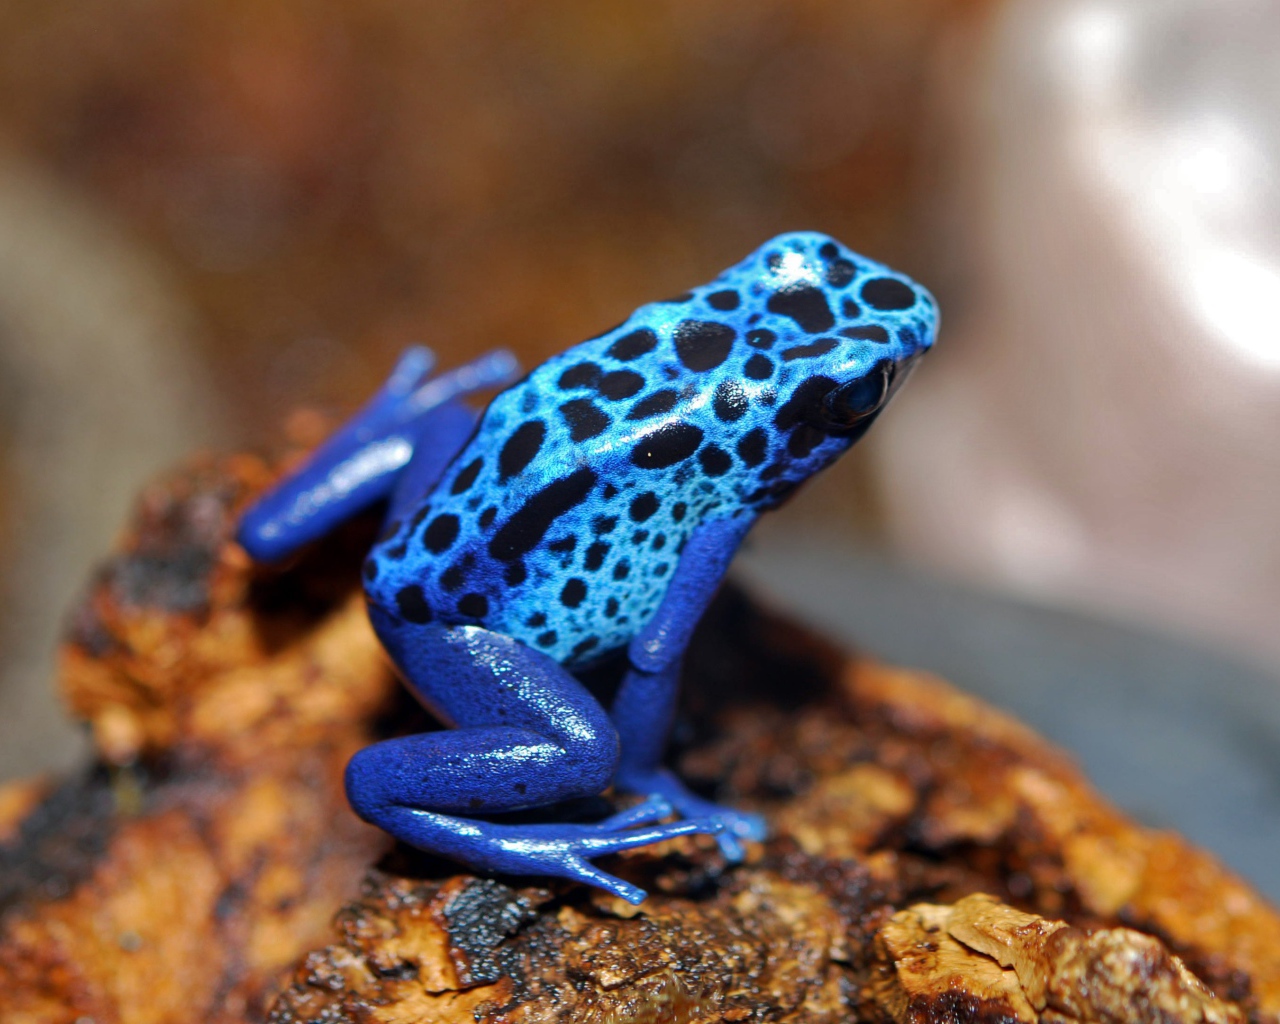 Blue frog sitting on a stone